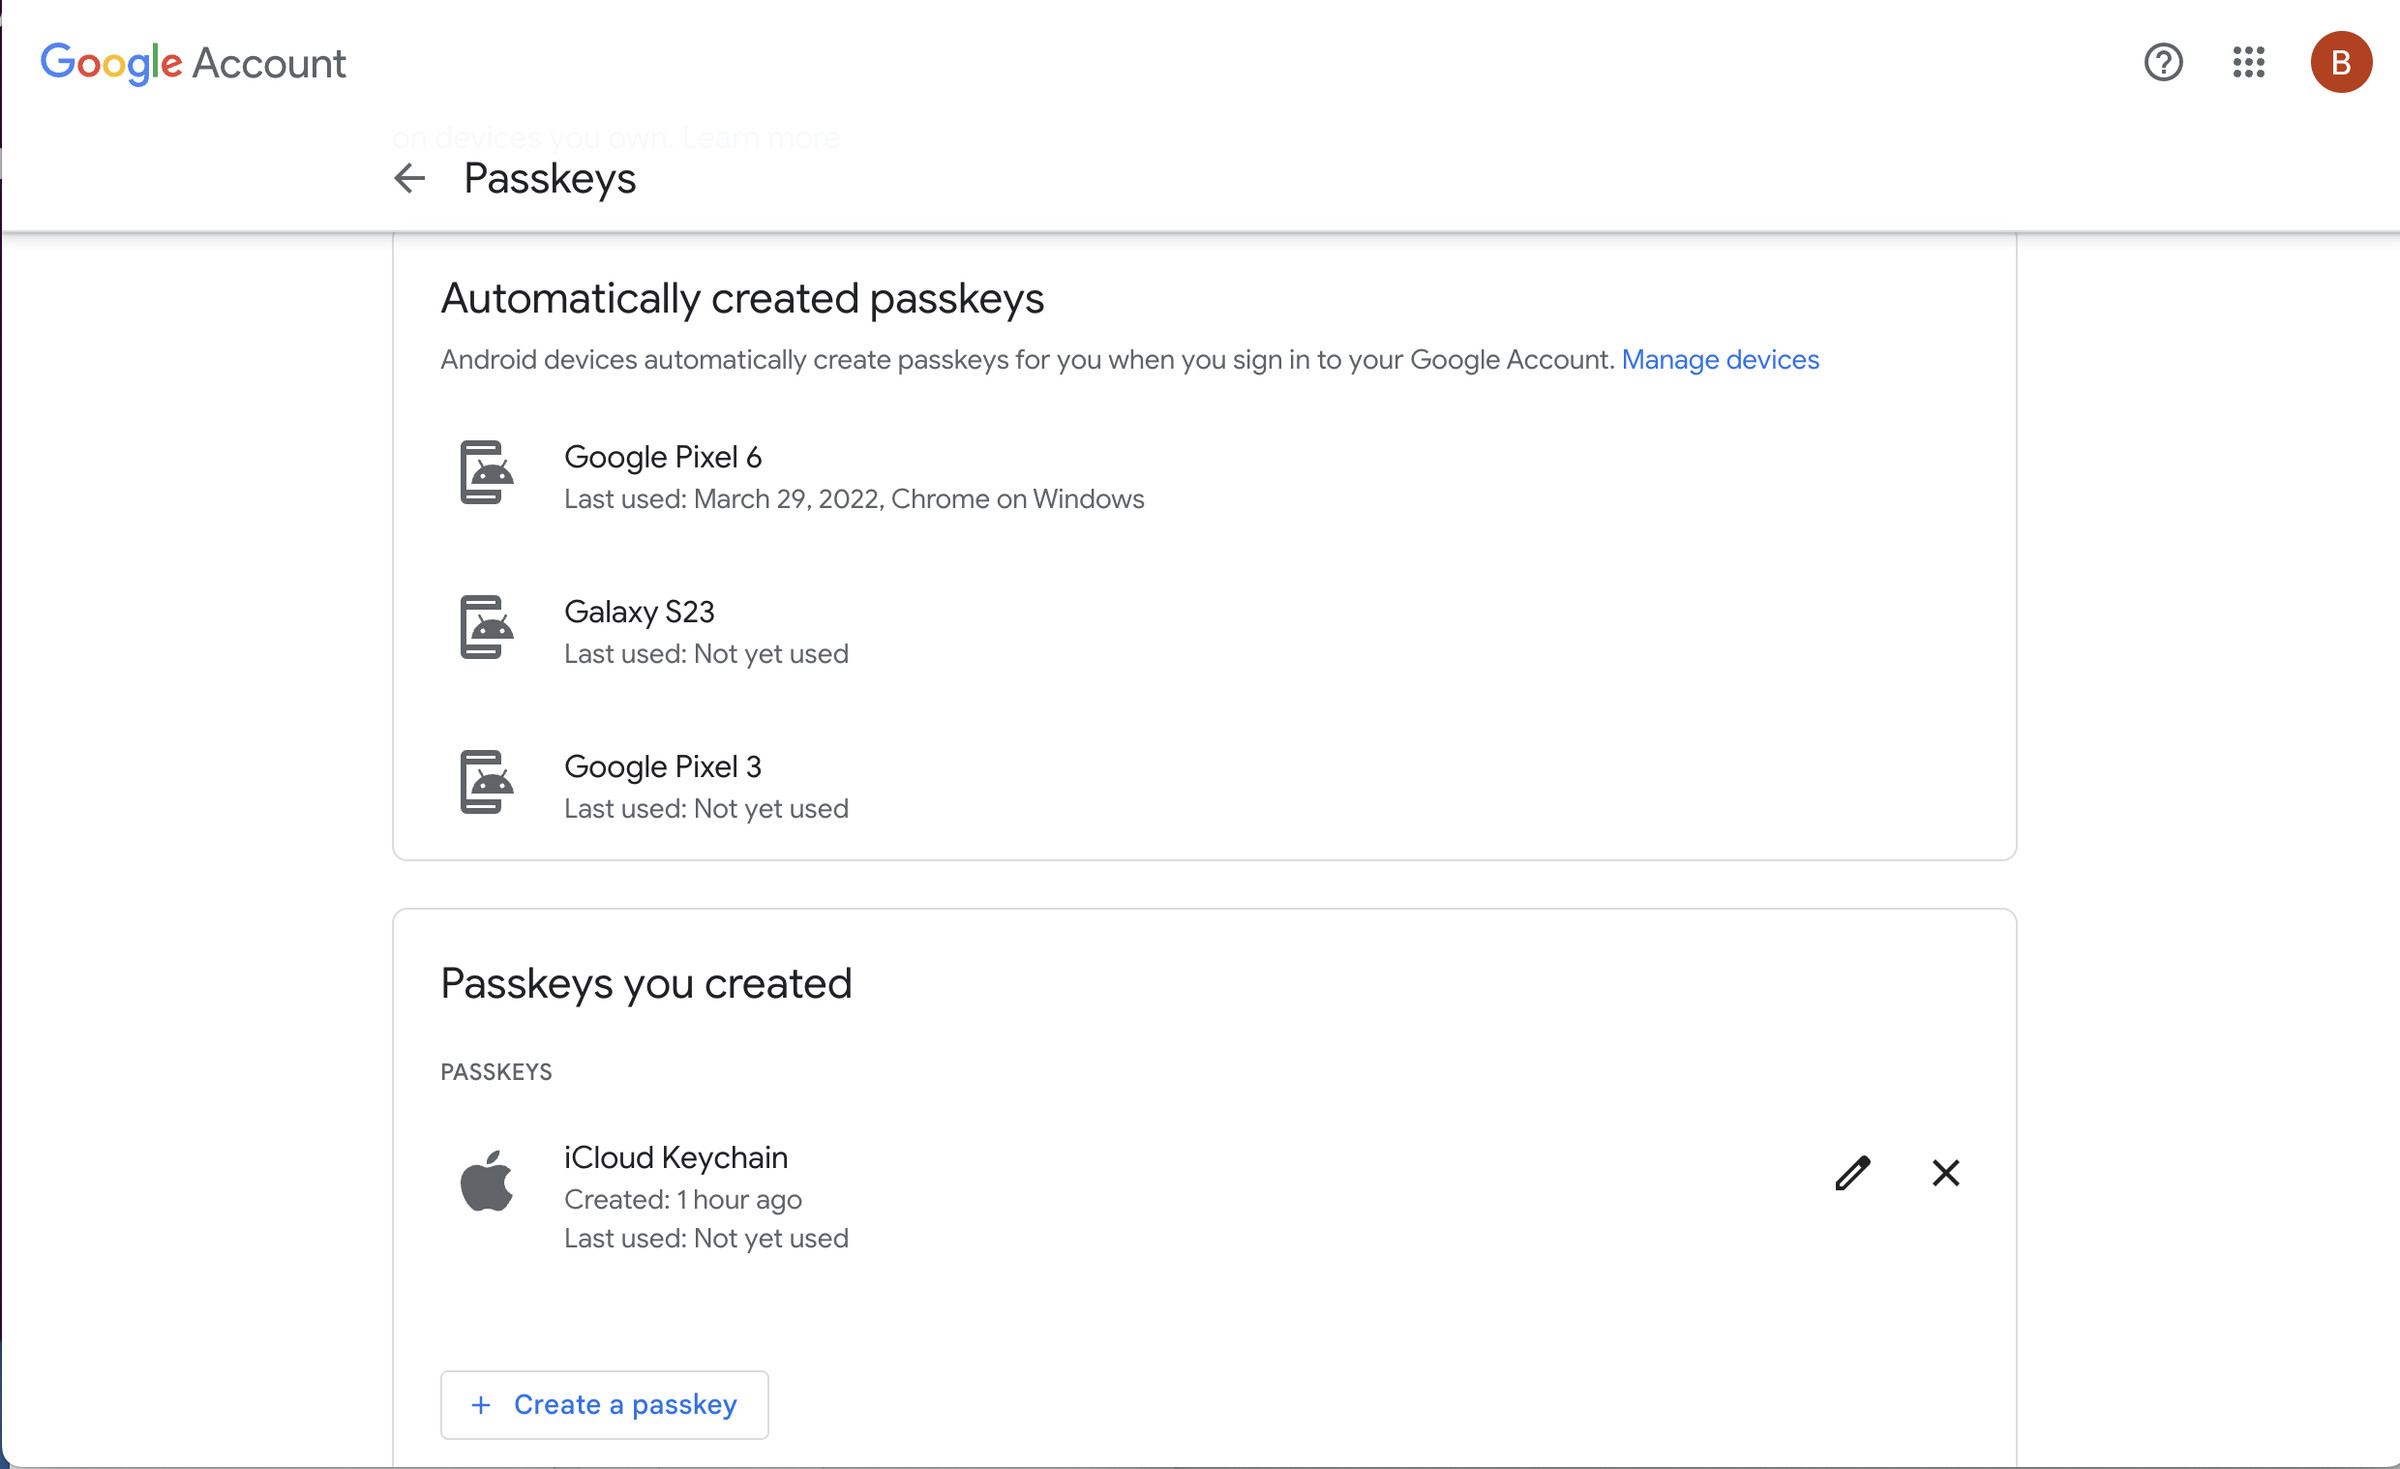 tech news Passkeys page on the Google Account with three automatically created passkeys and one entry under Passkeys you created.